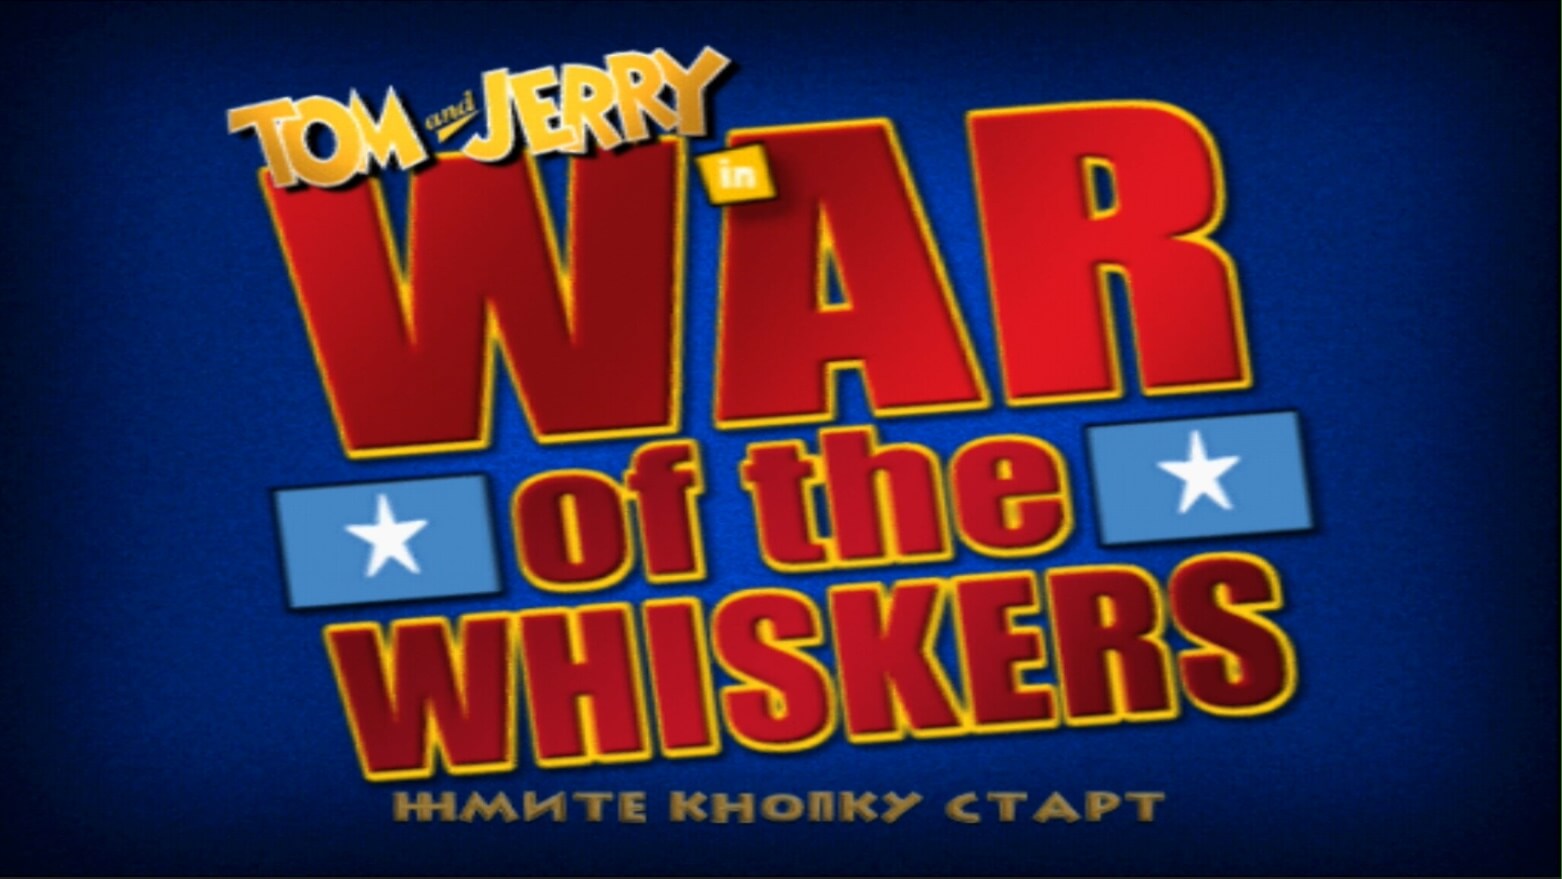 Tom & Jerry War of the Whiskers